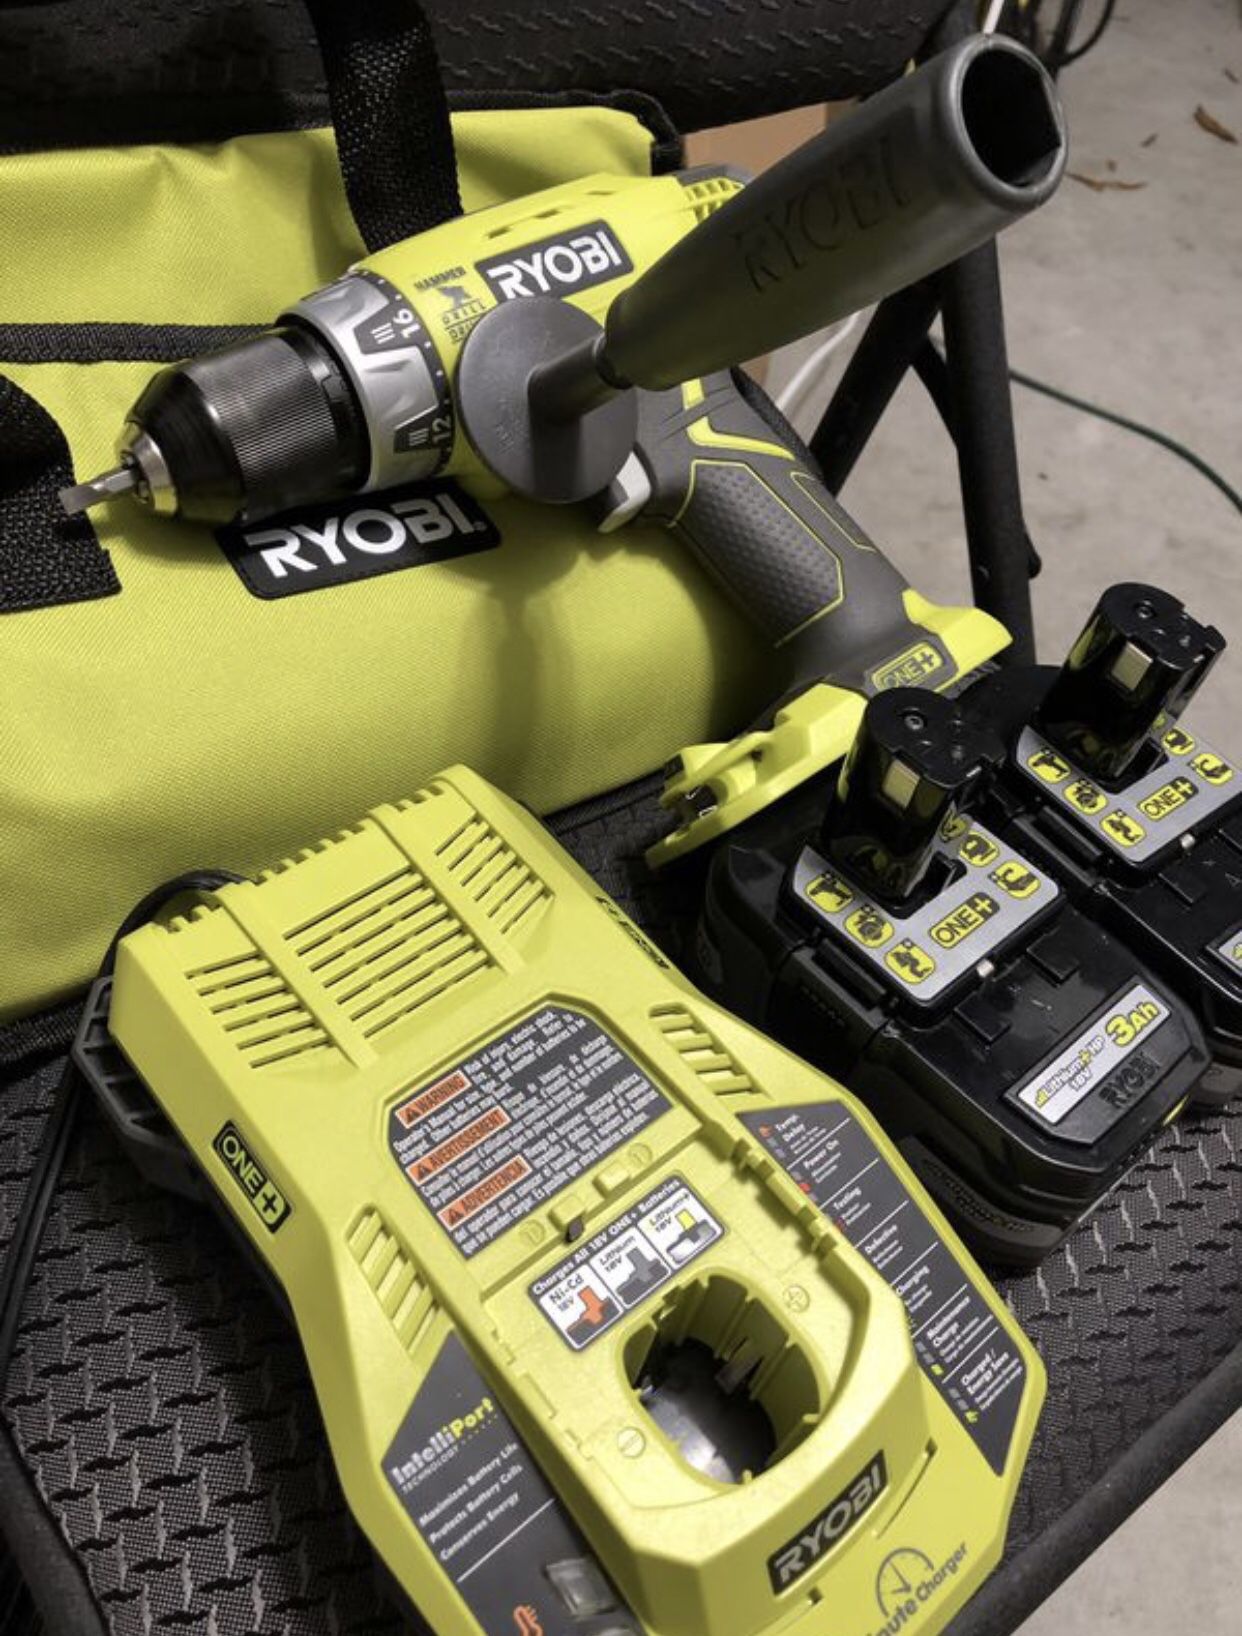 Ryobi Hammer Drill 2 Lithium 3 Ah Battery and Charger